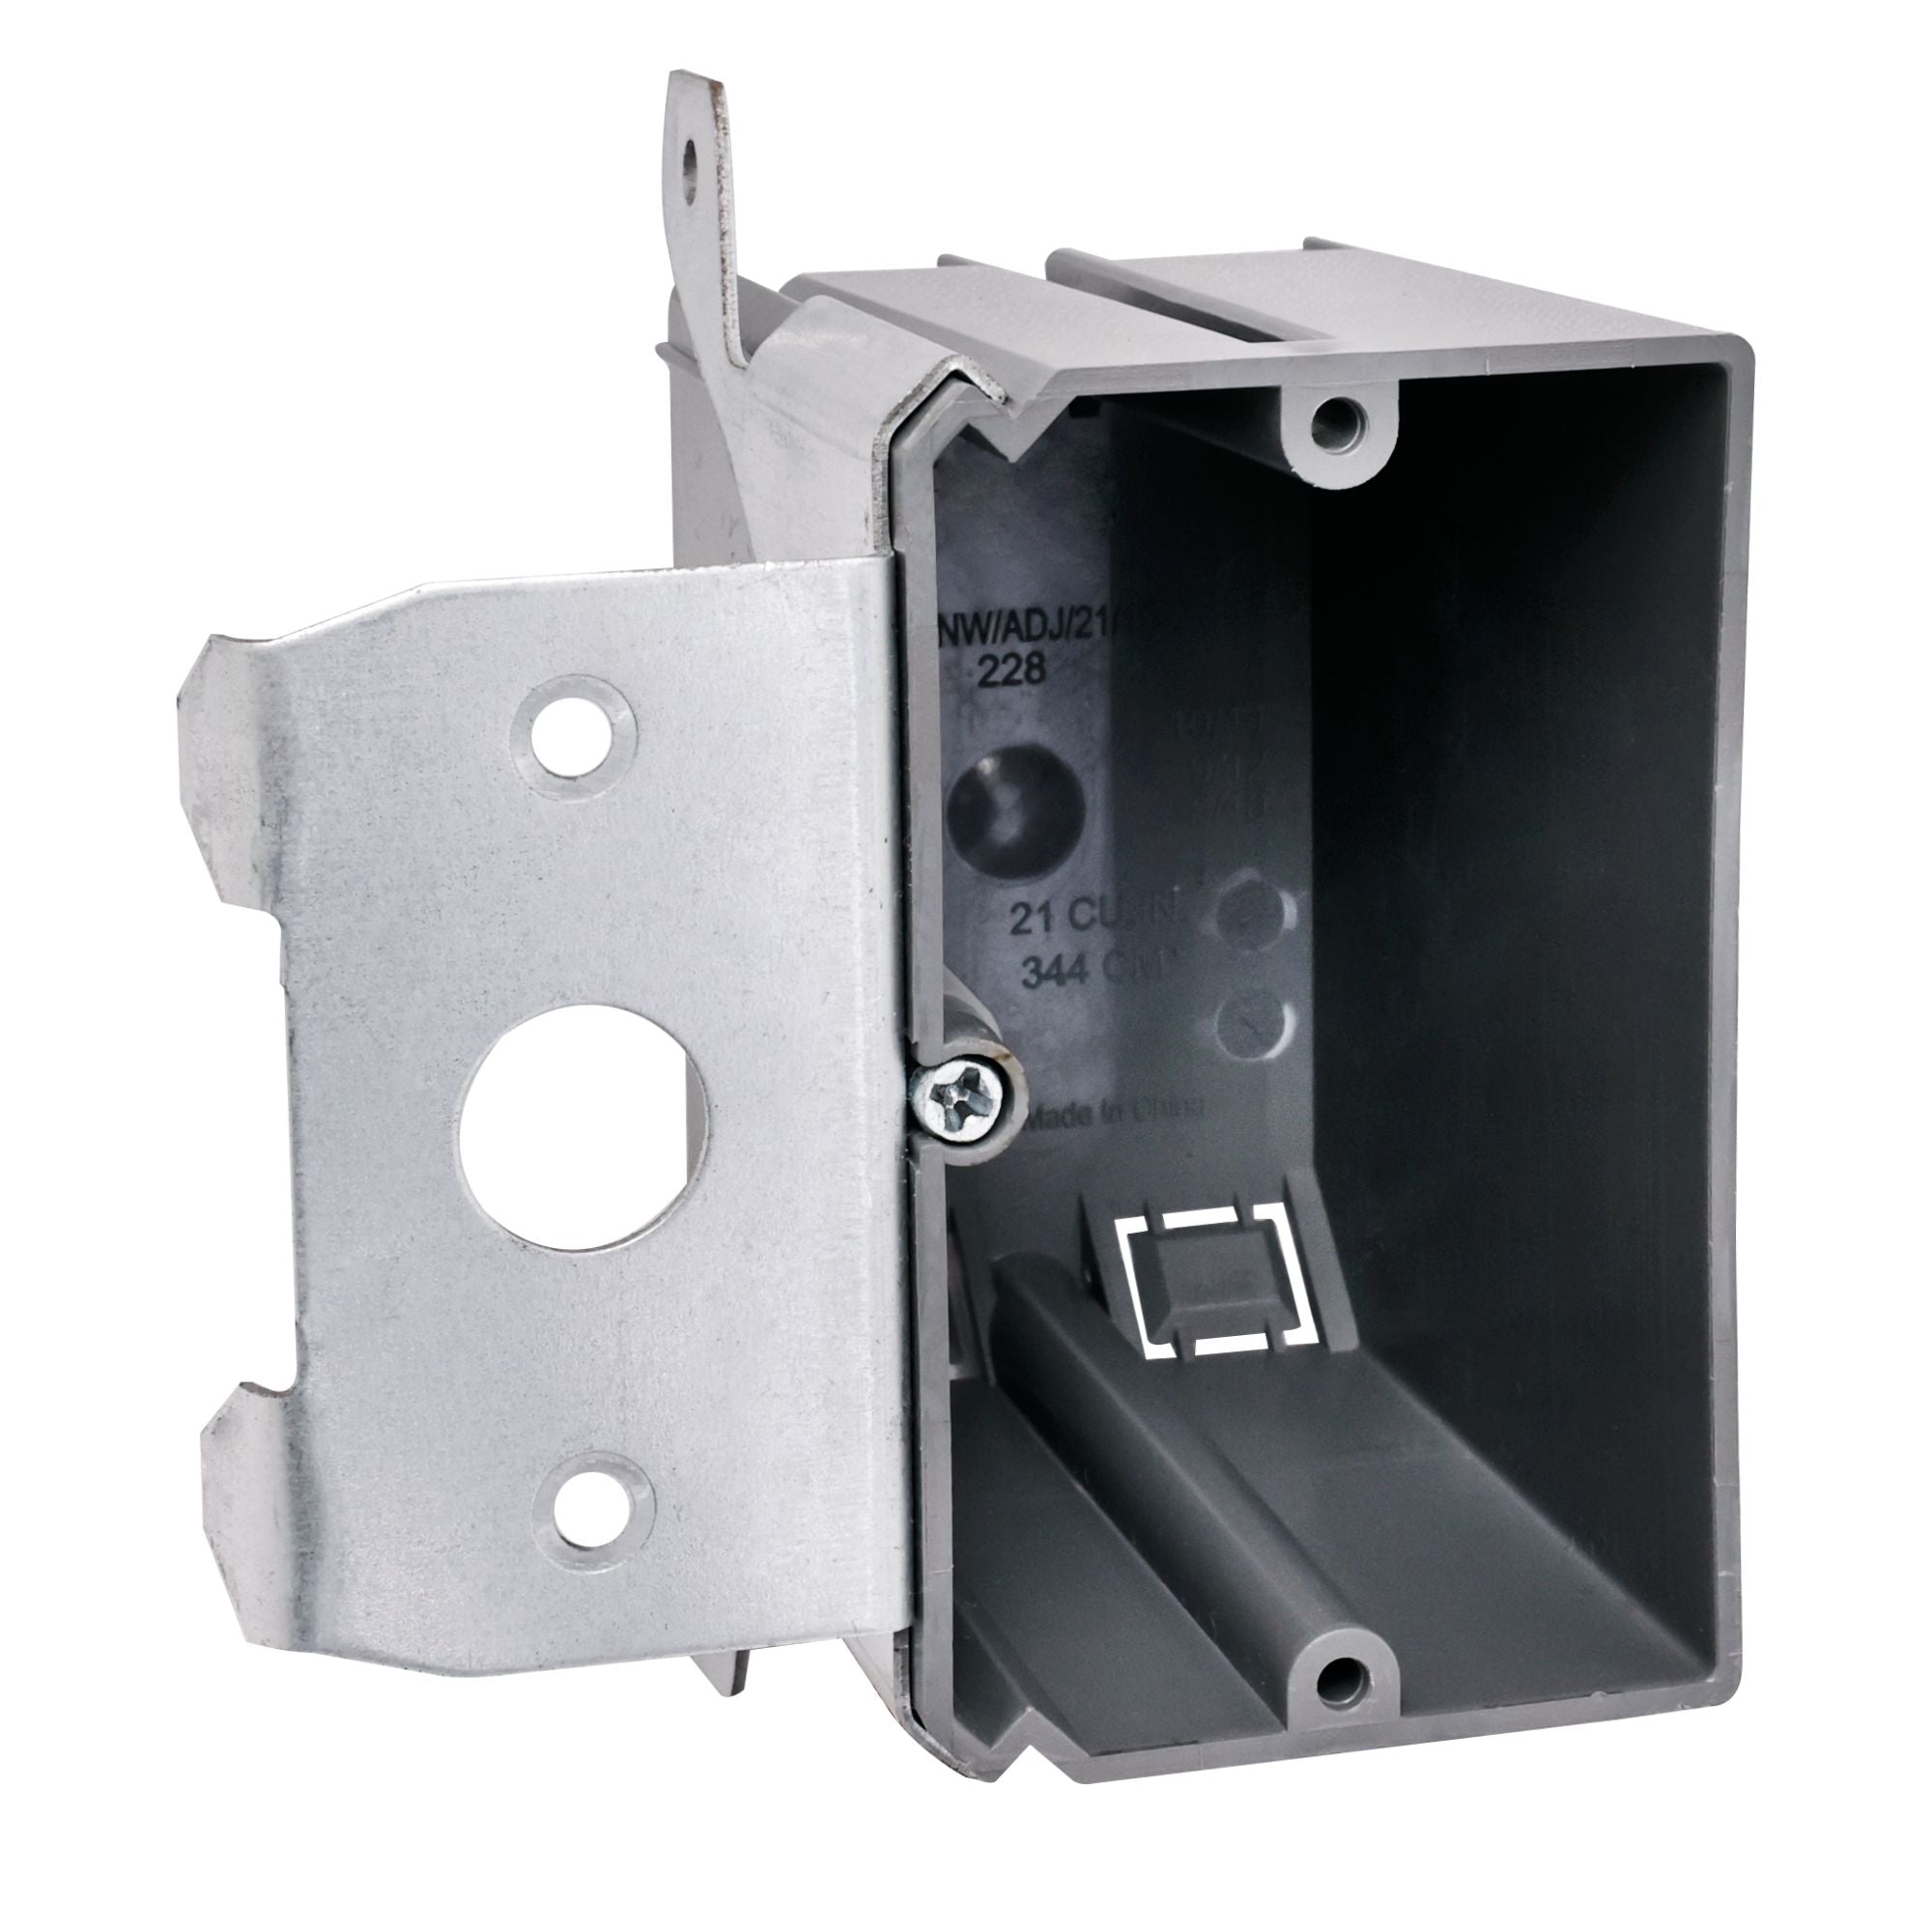 Non-Metallic One-Gang Adjustable Vertical Outlet Box - New Work, 21 Cubic